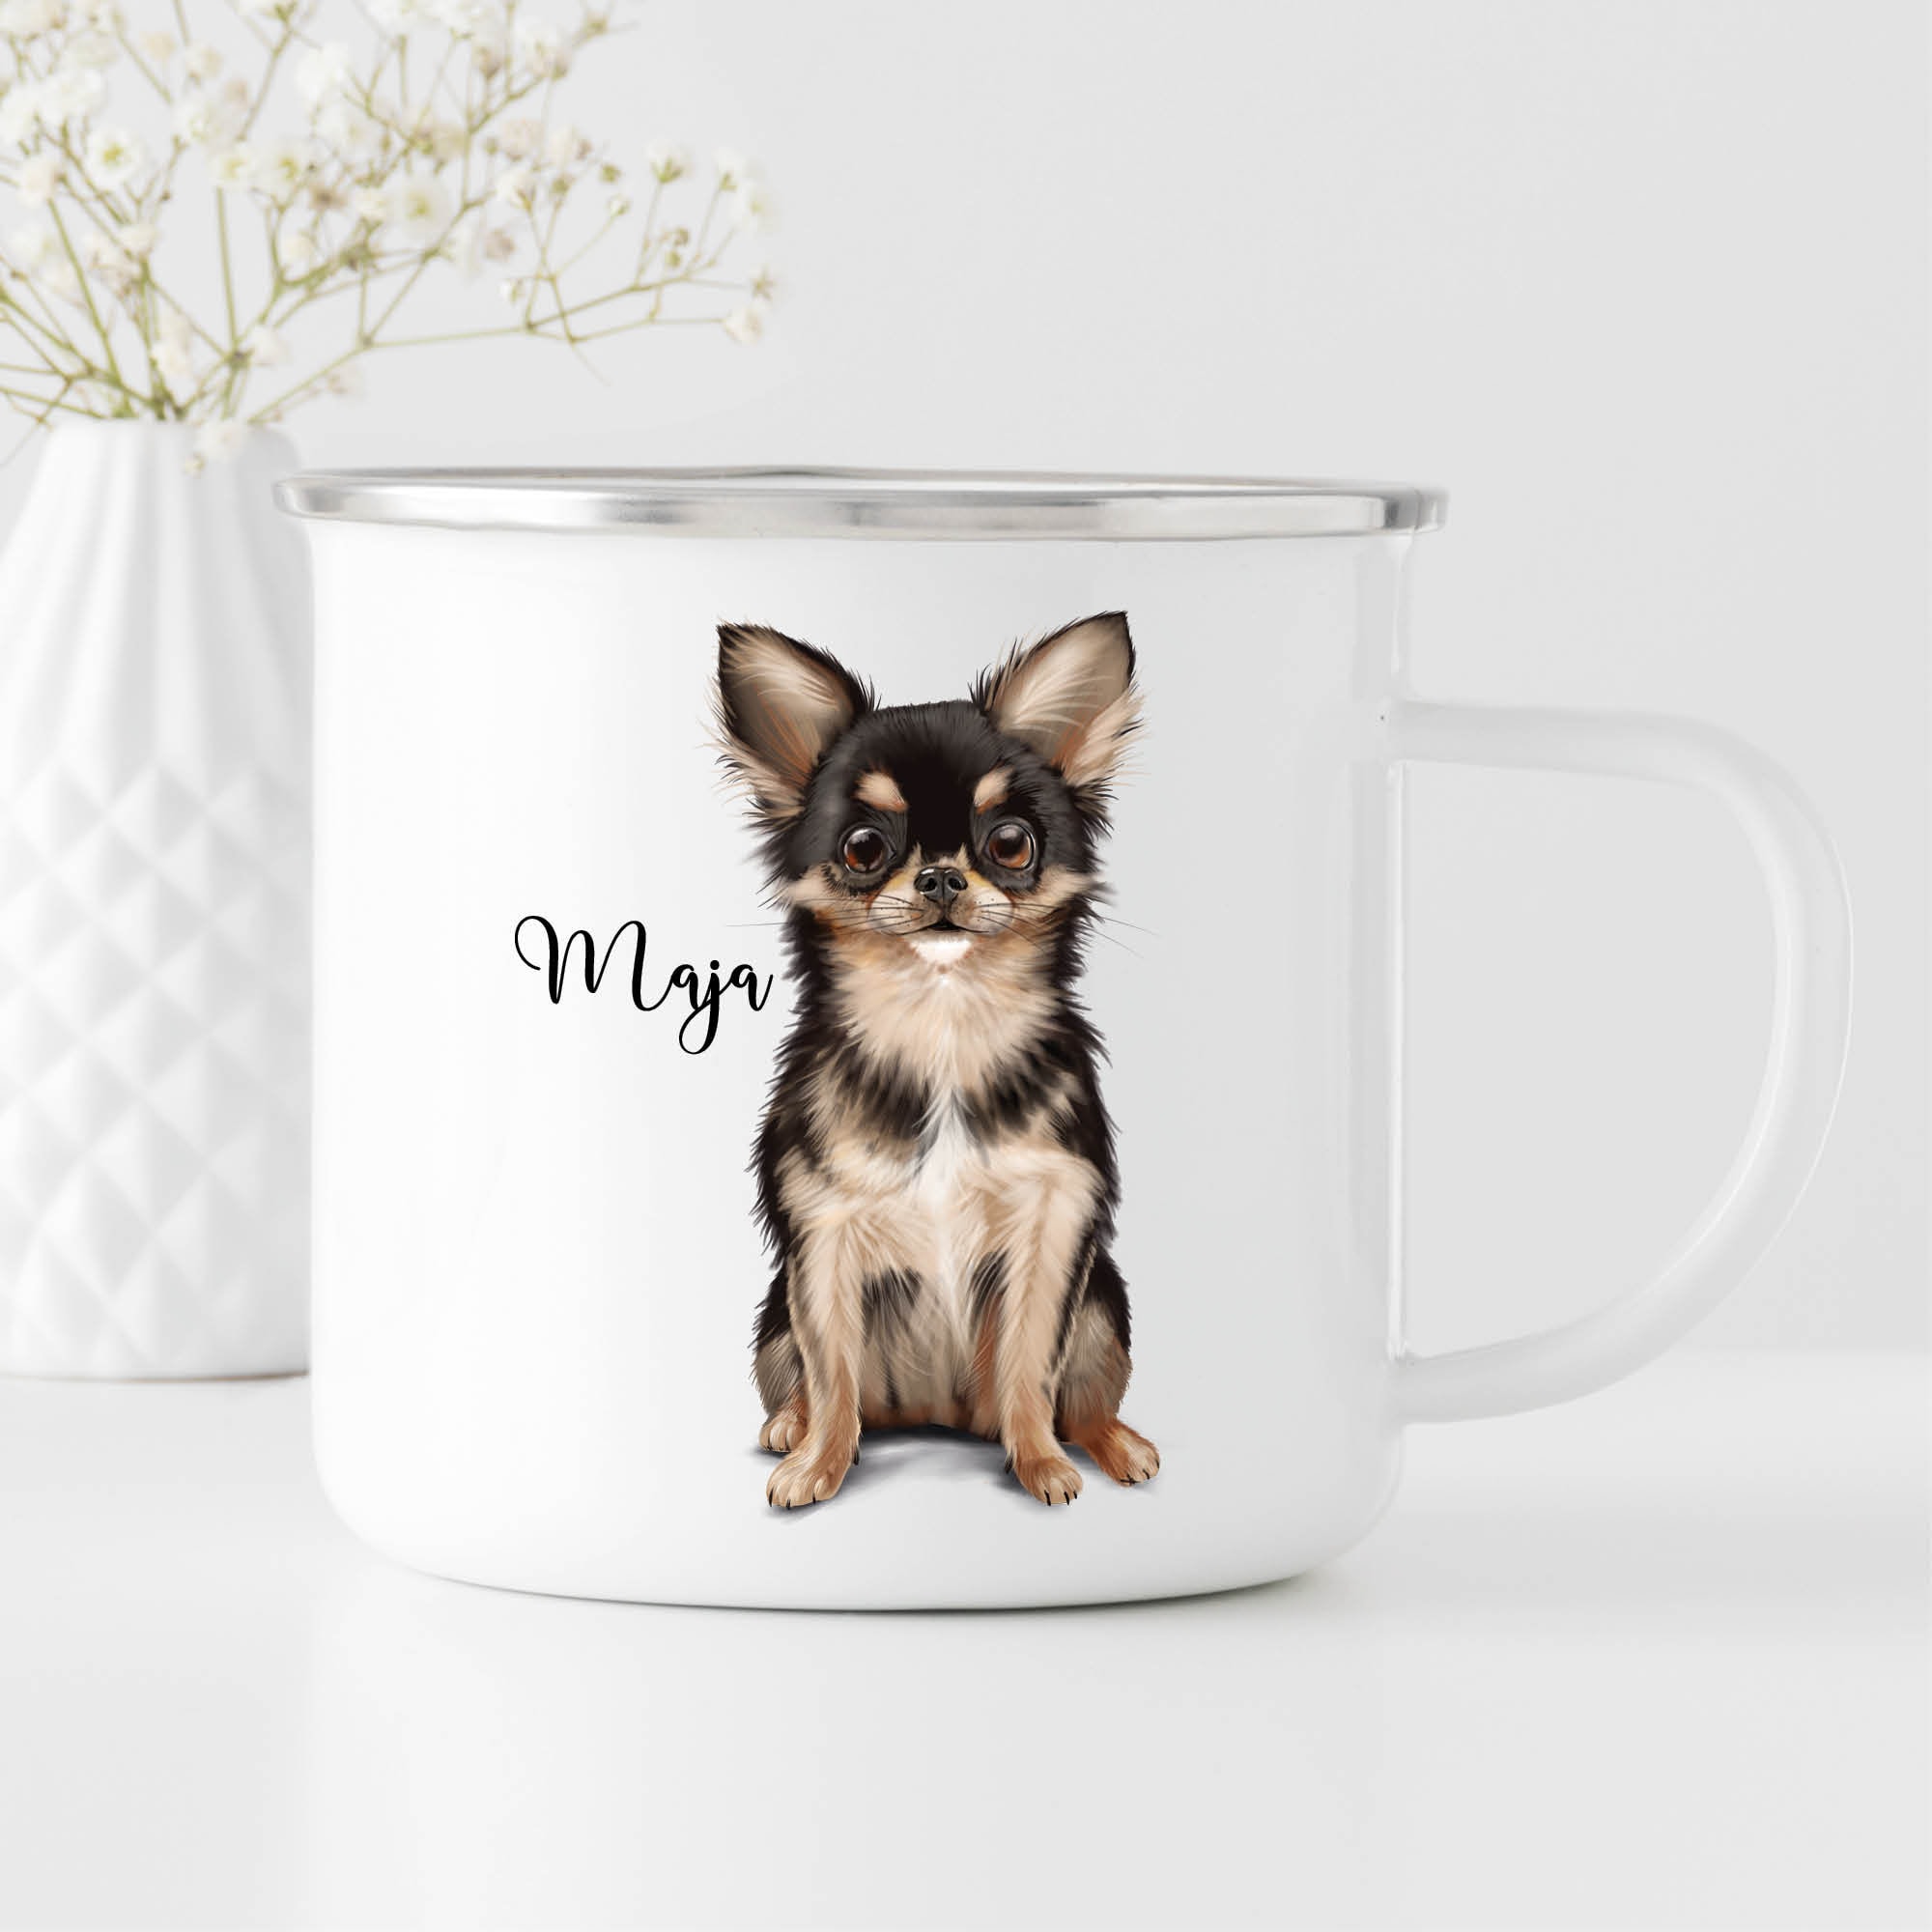 Campingbecher Emaille Hund Chihuahua mit Wunschname Emaille Tasse